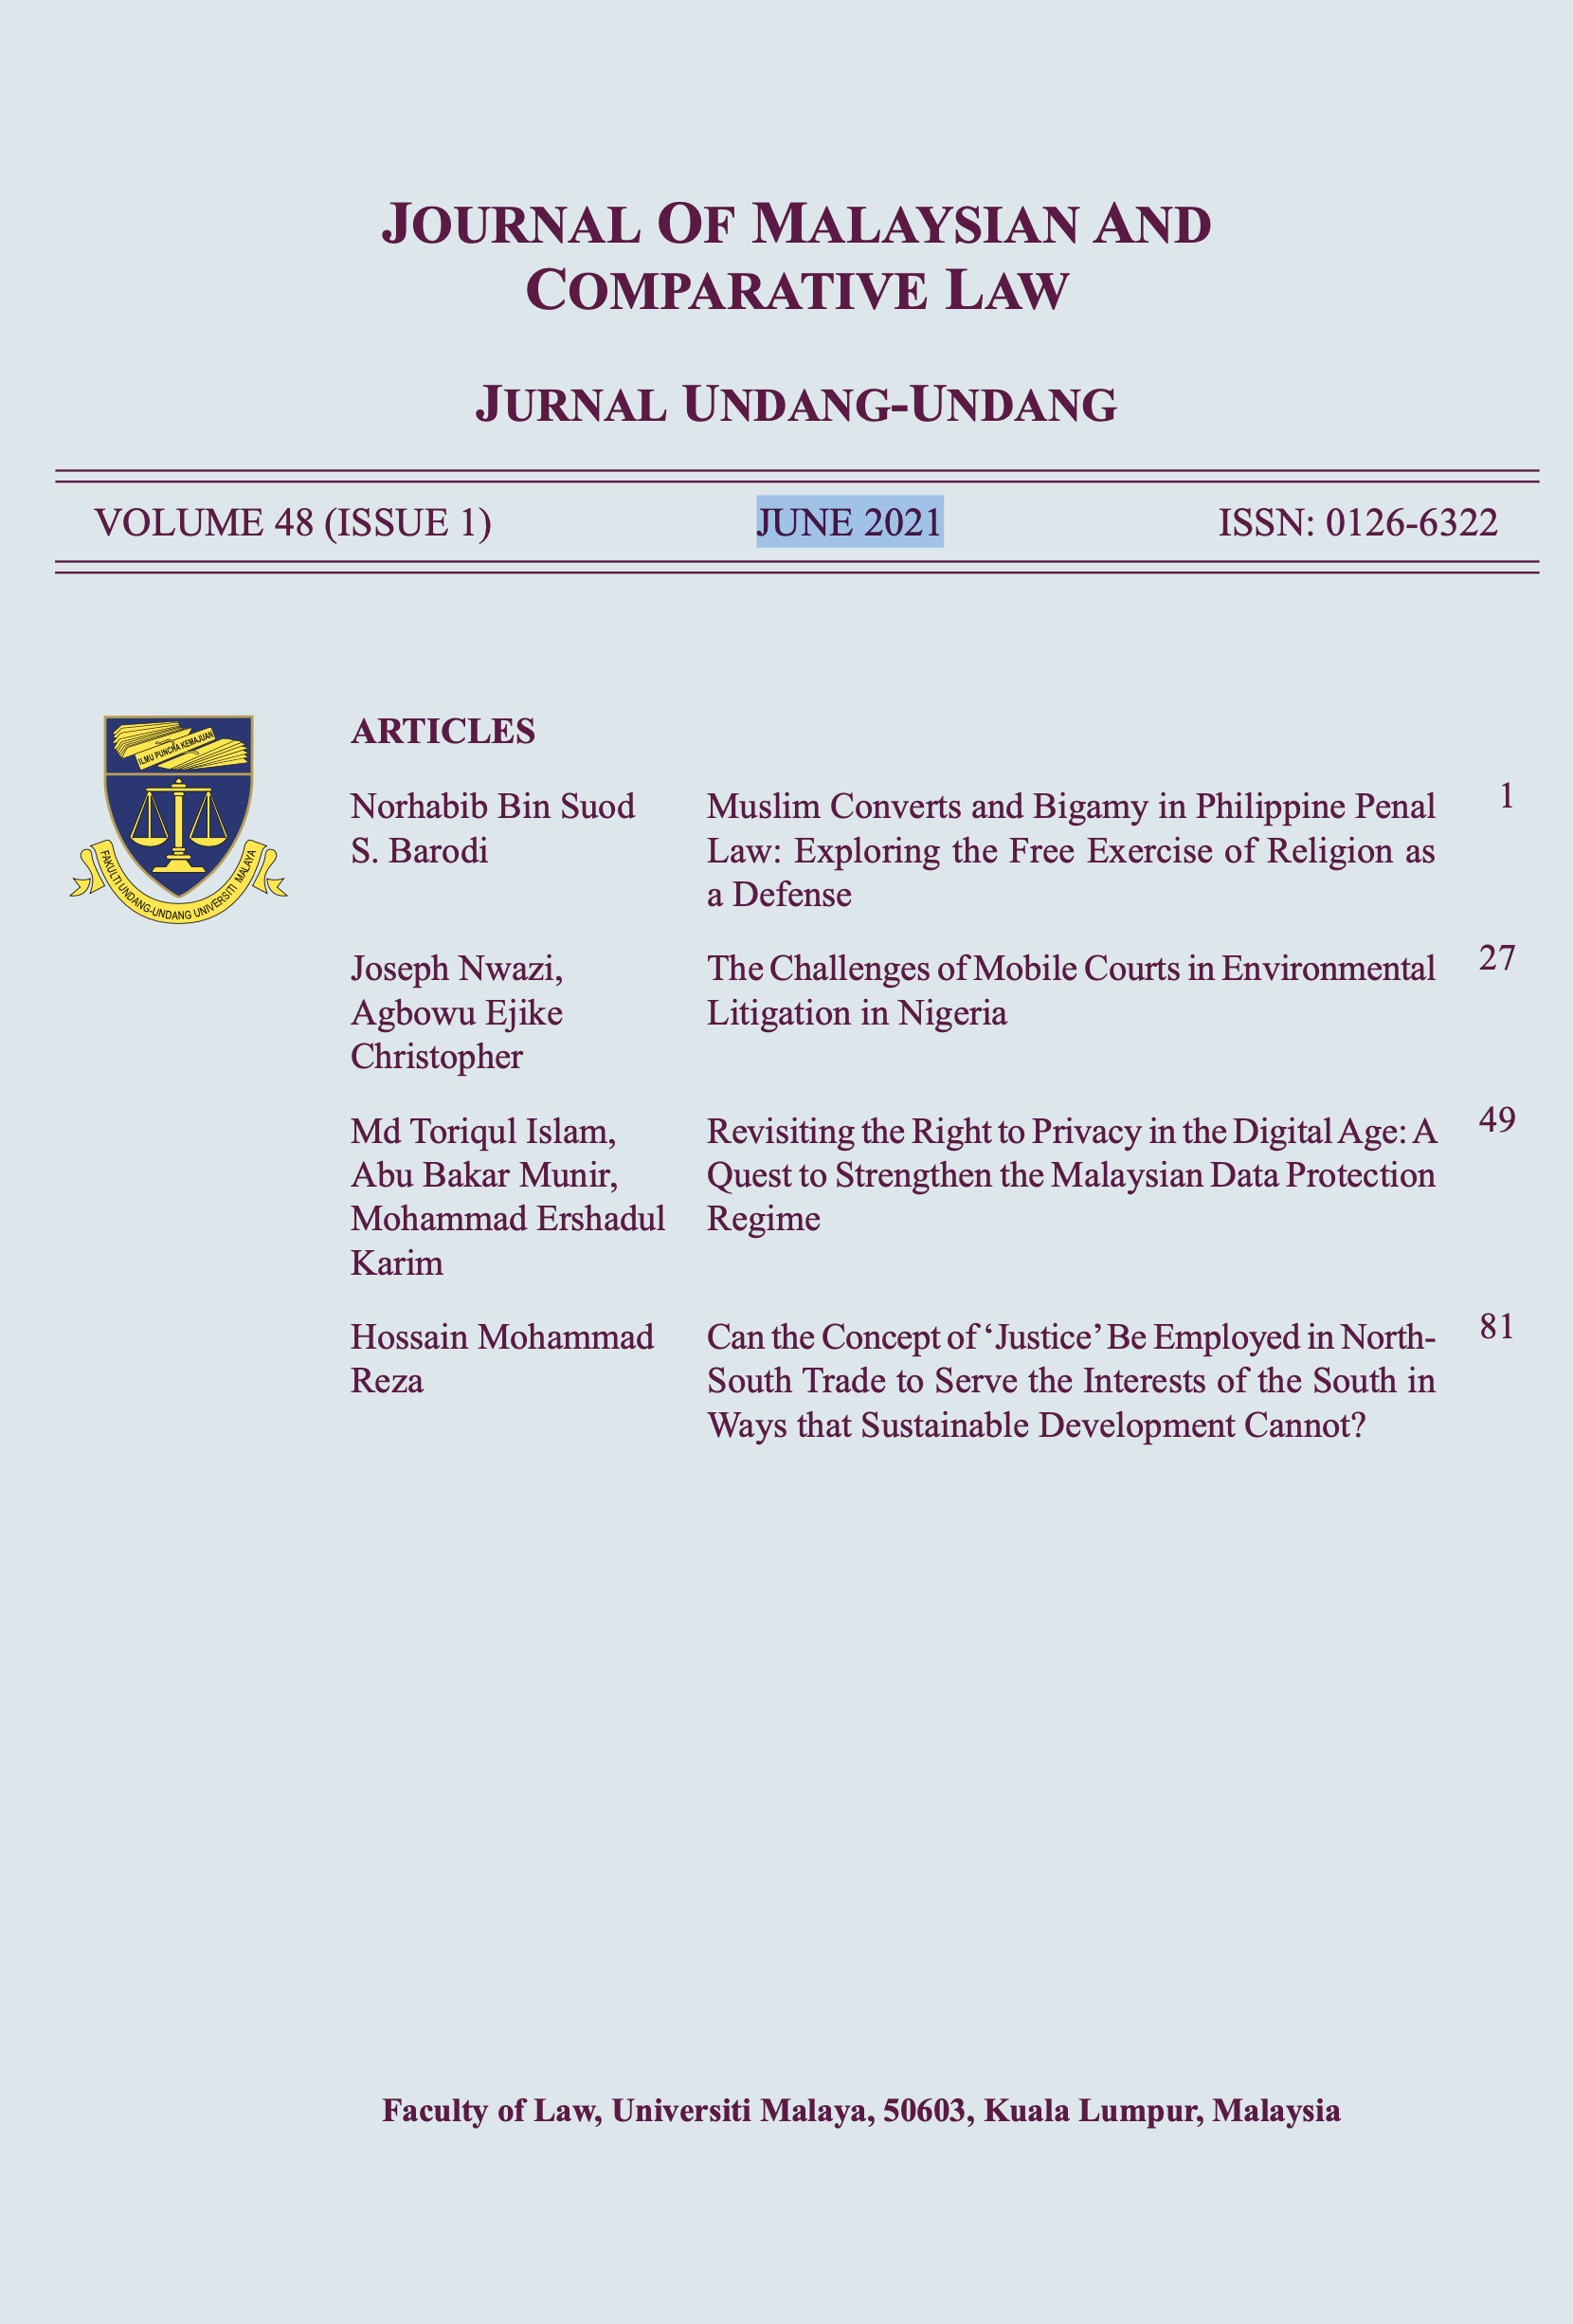 					View Vol. 48 No. 1 (2021): JOURNAL OF MALAYSIAN AND COMPARATIVE LAW
				